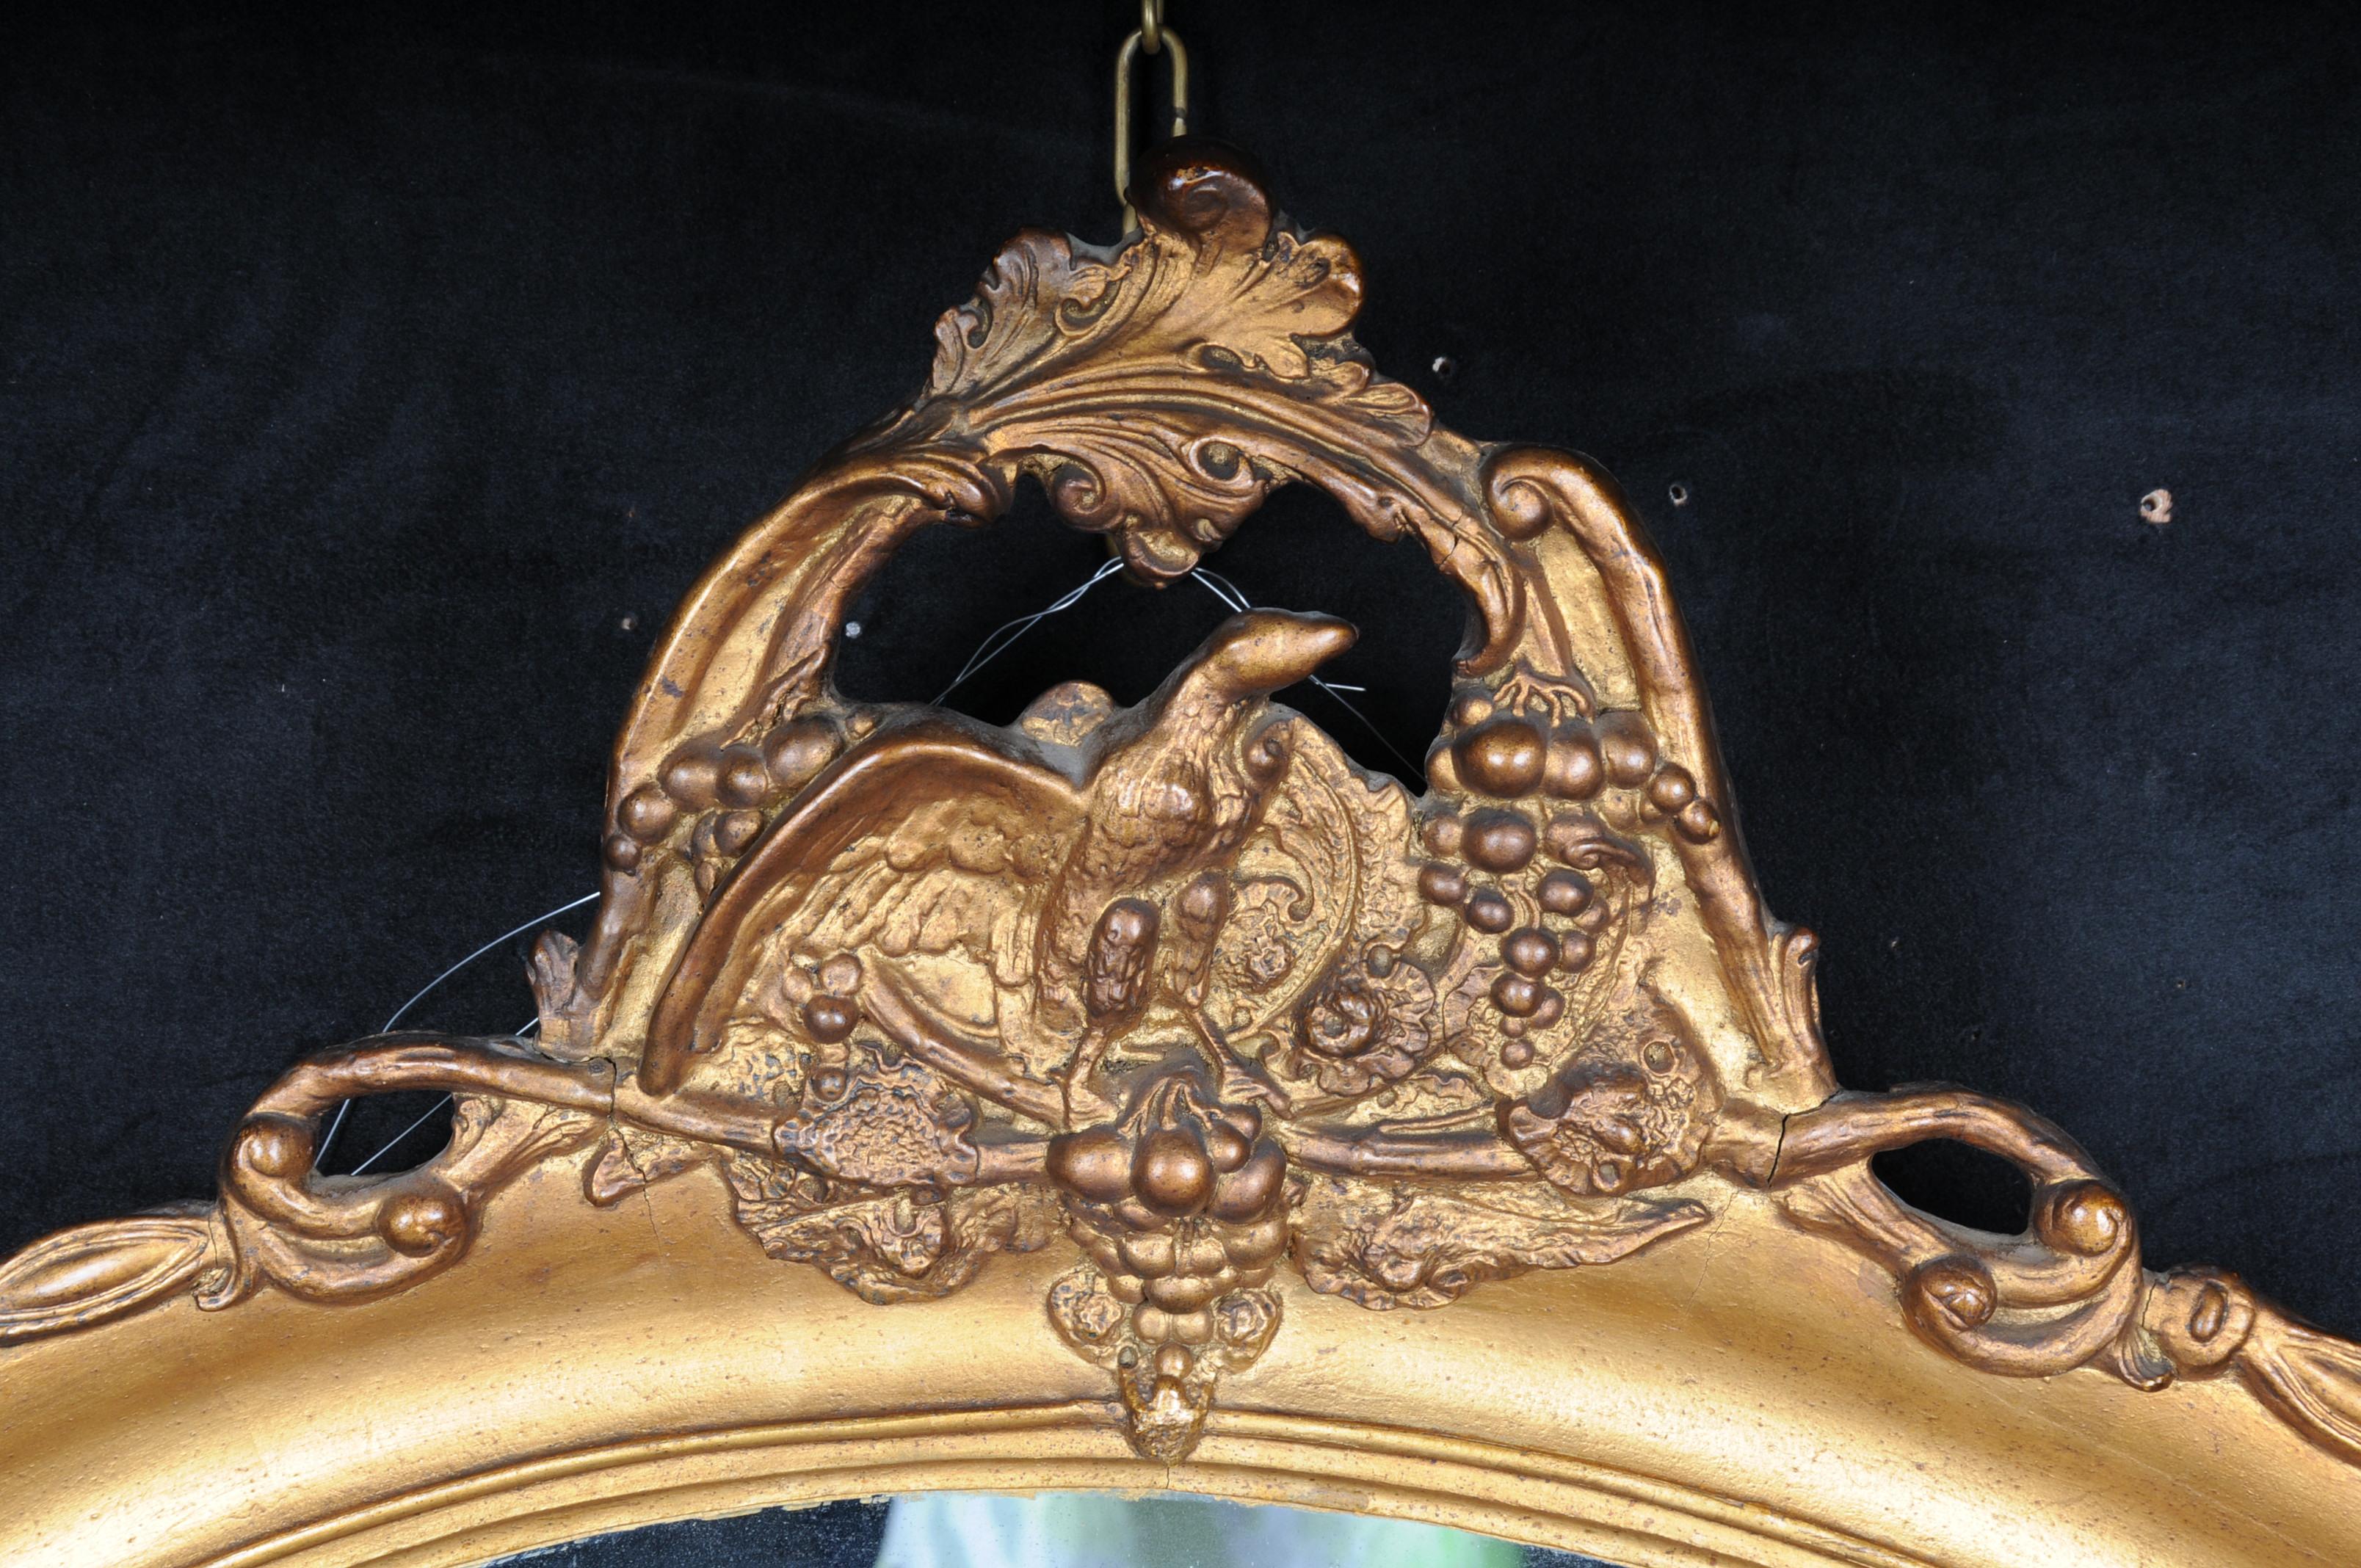 20th century Beautiful oval wall mirror, gold

Oval framed wall mirror, gilded wood/stucco. Frame crowned with an eagle on rocaile accents.
Crossed torches in the classical manner.